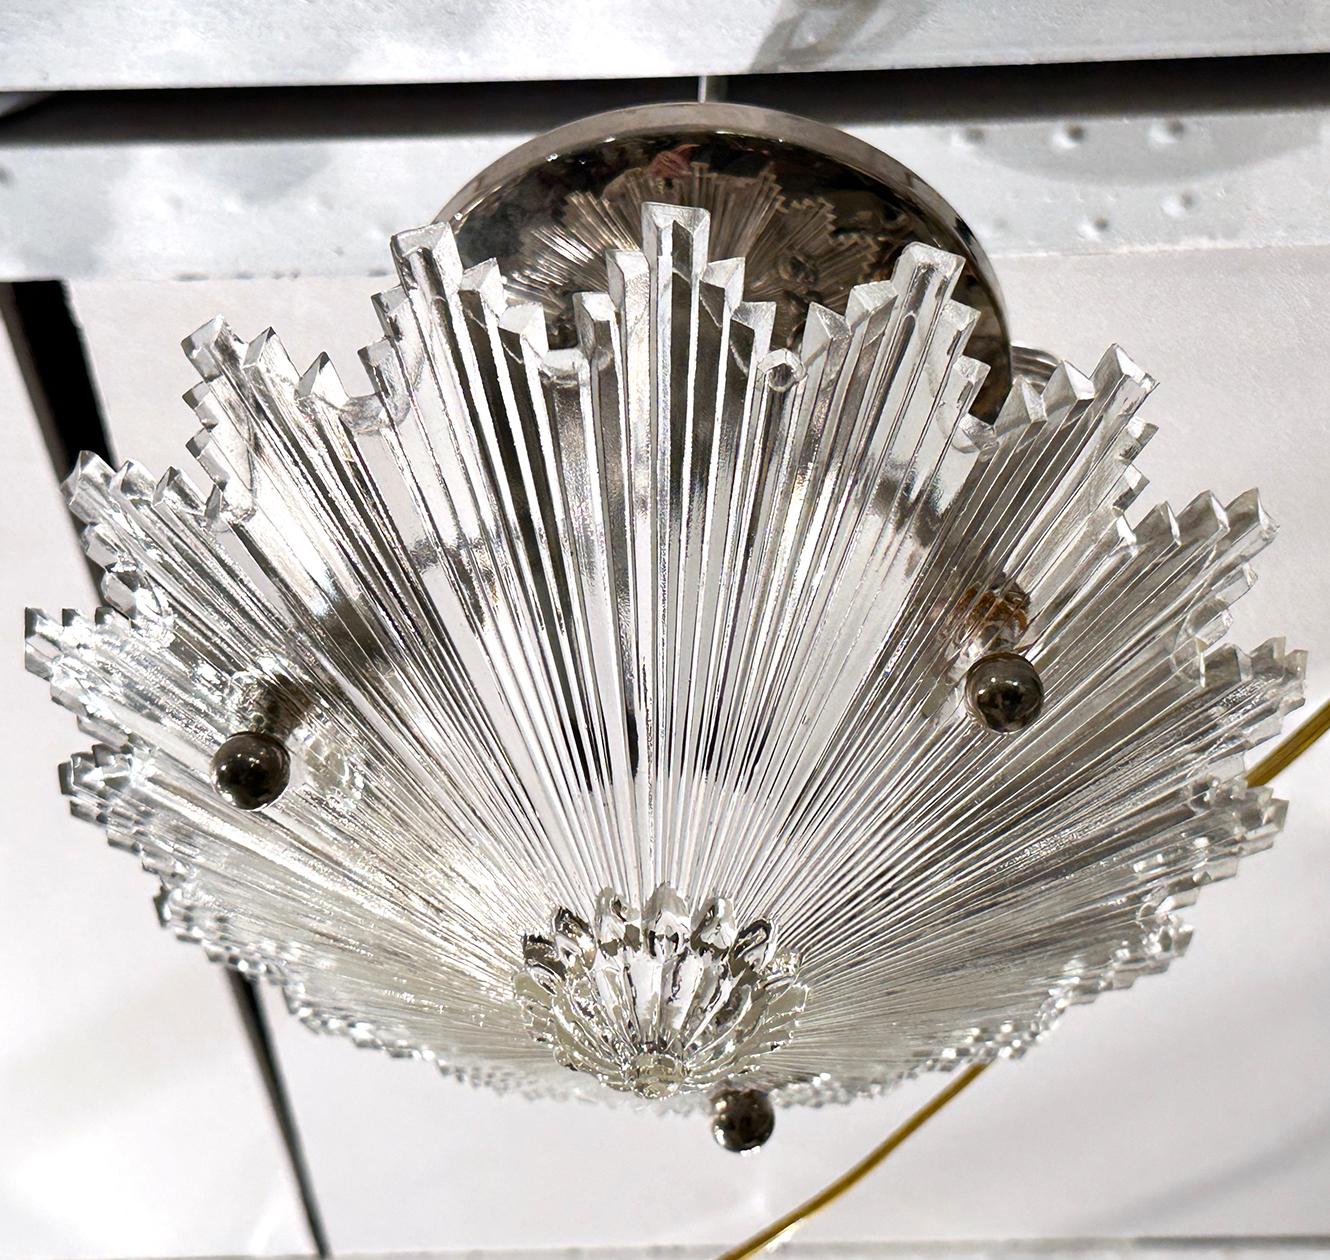 Pair of French circa 1940's molded glass light fixtures. Sold Individually

Measurements:
Drop: 7